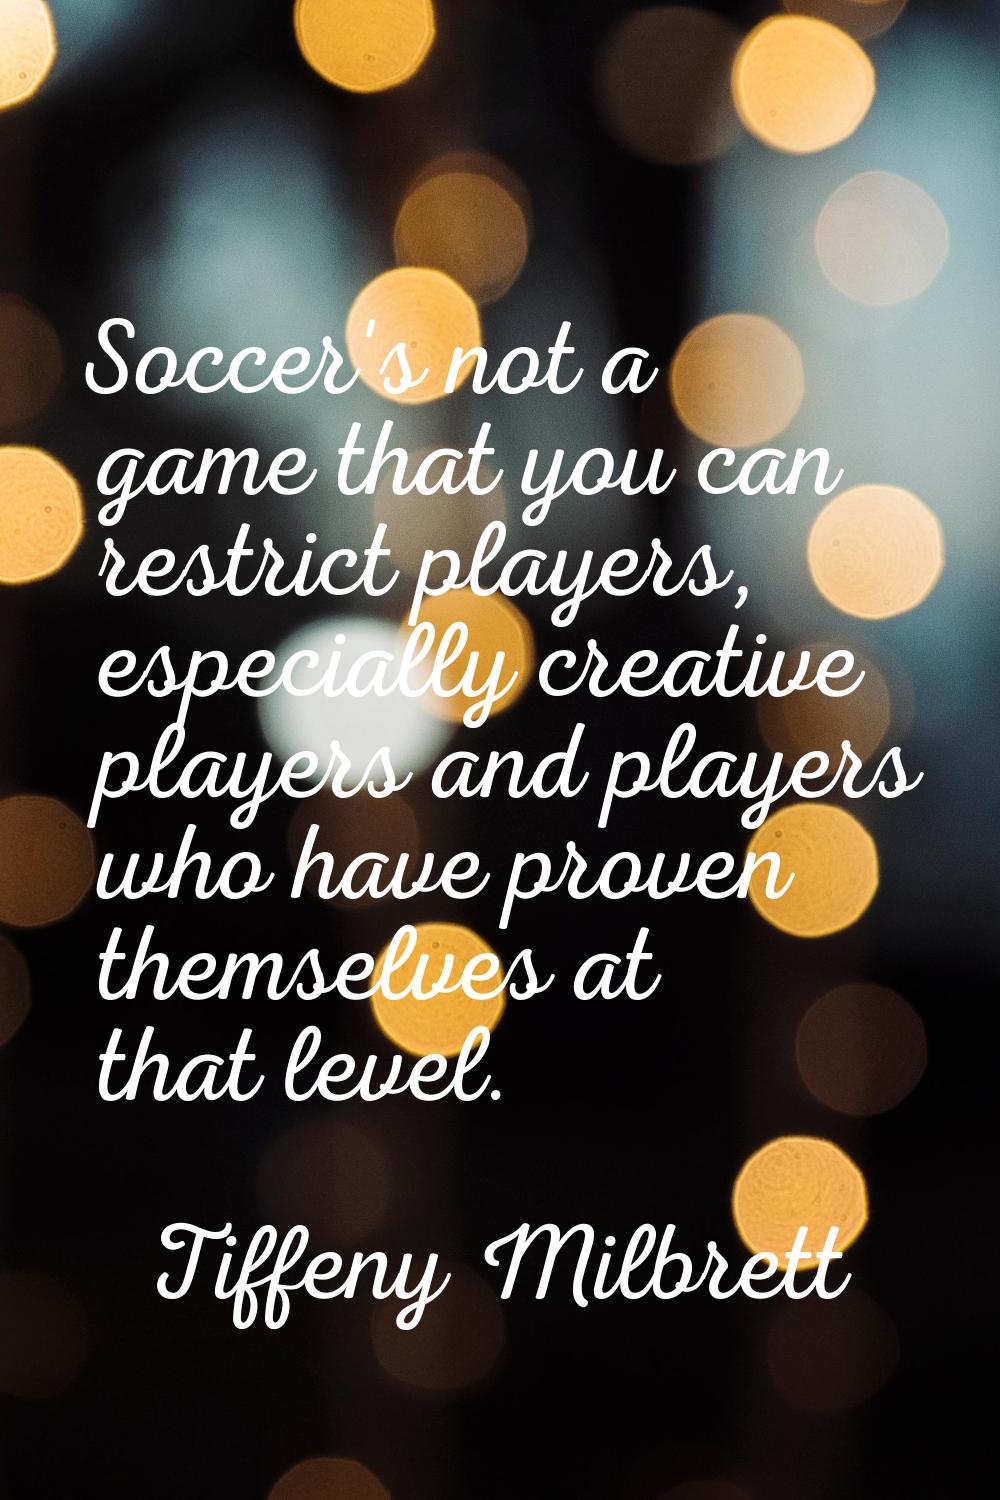 Soccer's not a game that you can restrict players, especially creative players and players who have